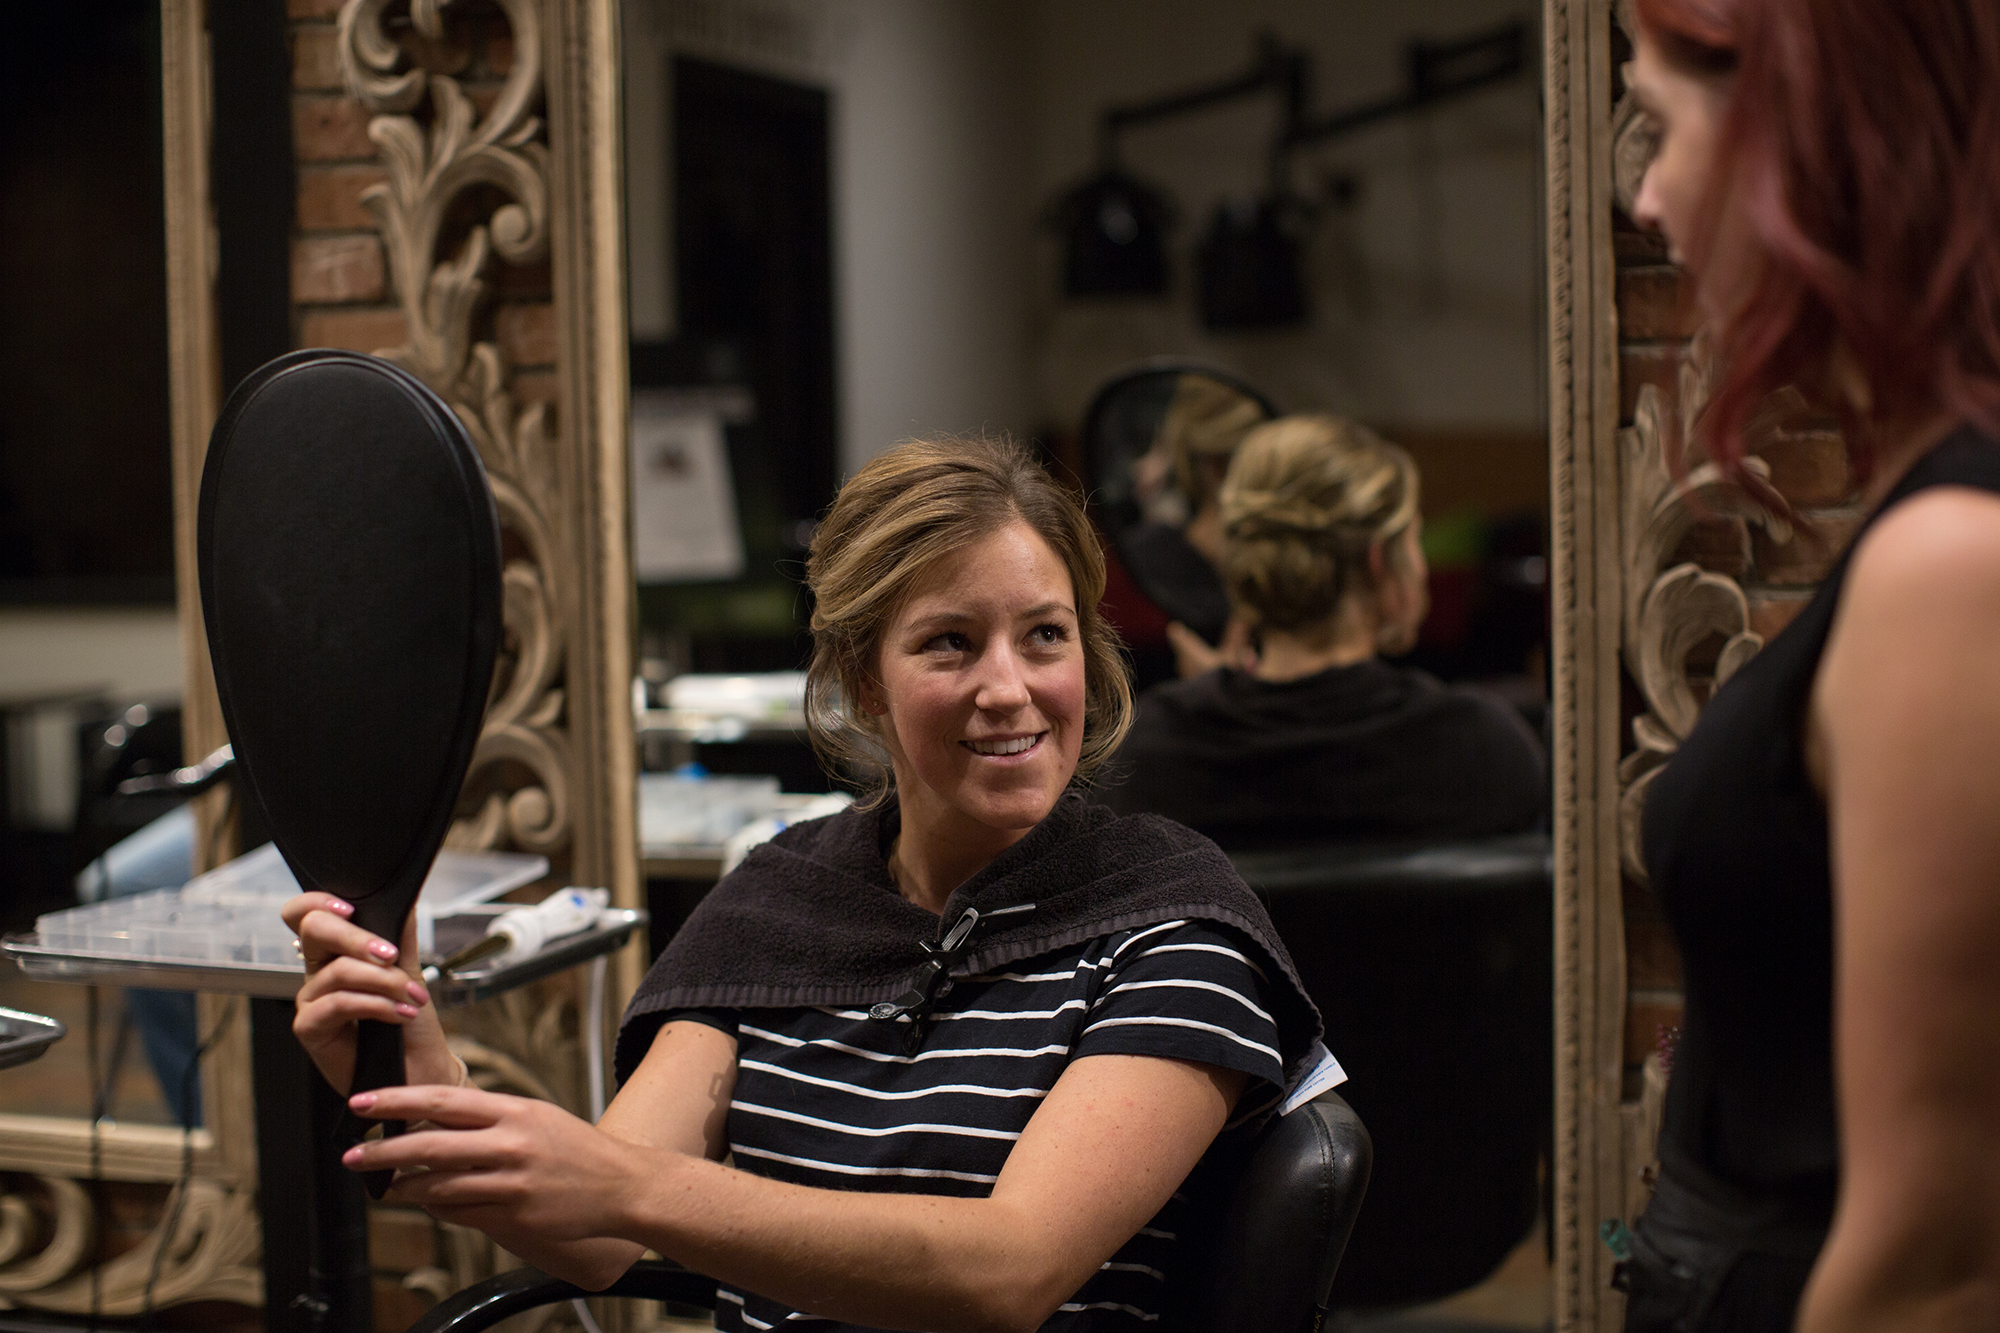 2018 Olympic Bronze medalist freeskier Brita Sigourney gets her hair done at John Paul Mitchell Systems' focus salon, Raika Studio, for the 2018 New York Gold Medal Gala.